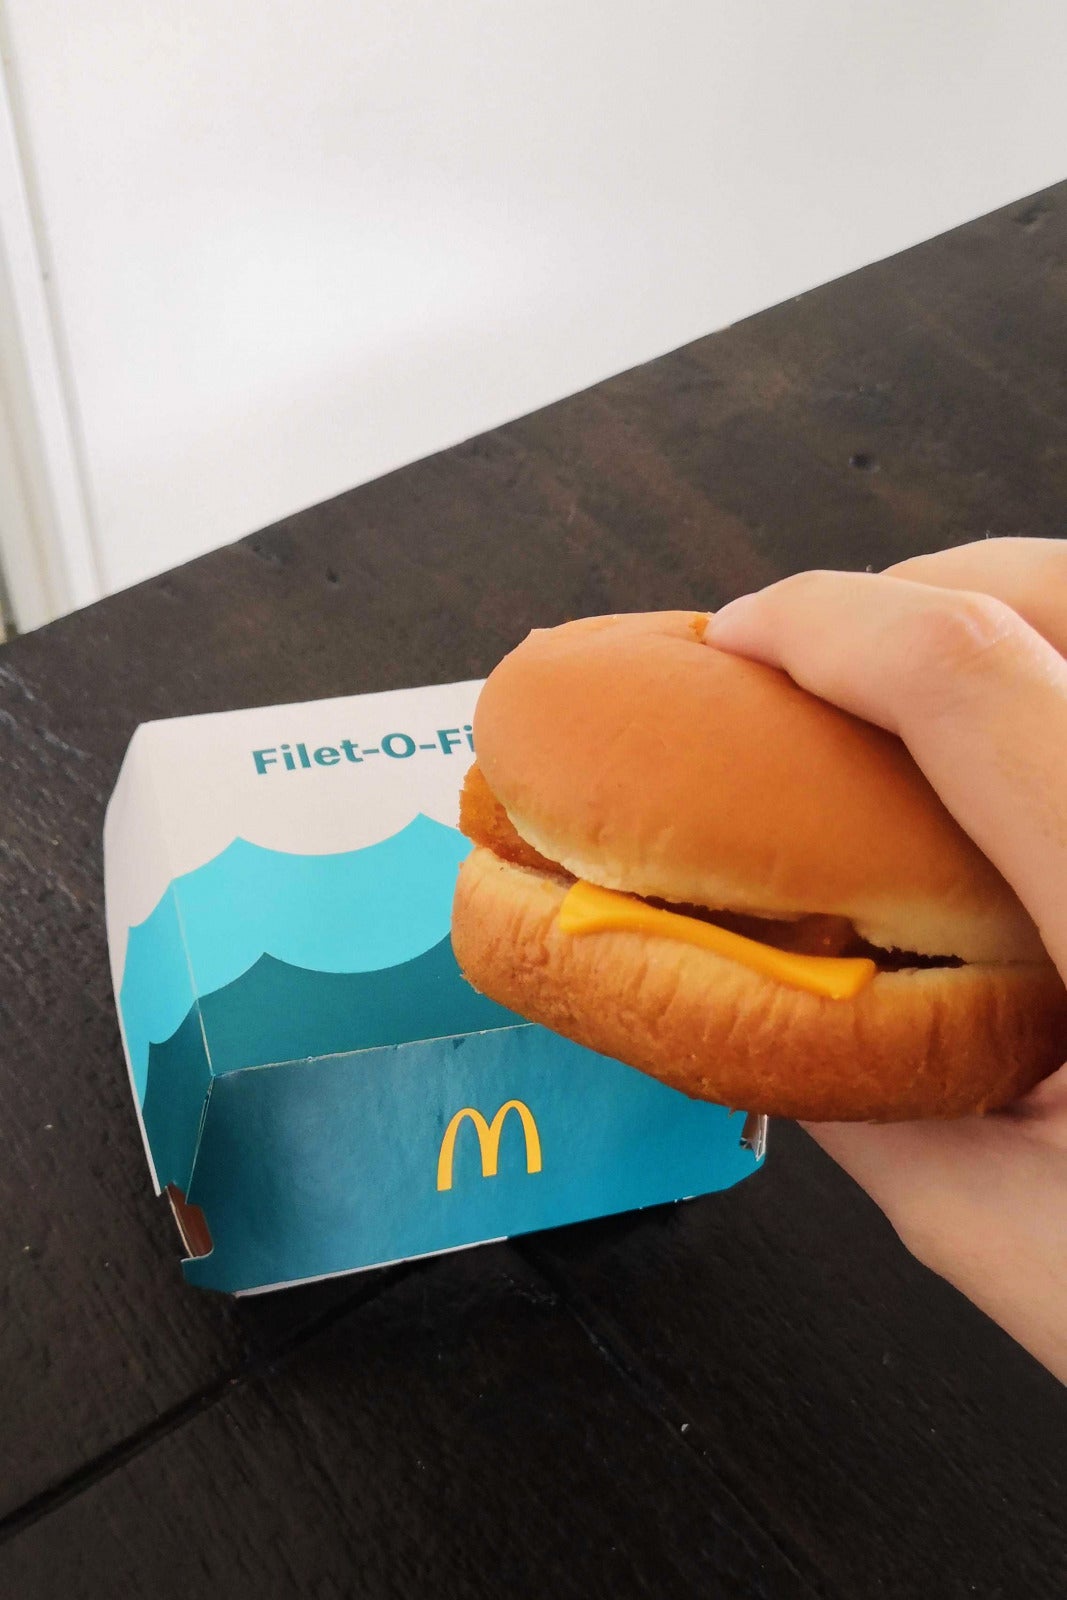 NOODOU holding a Filet O Fish burger in hand and a packaging box malaysia